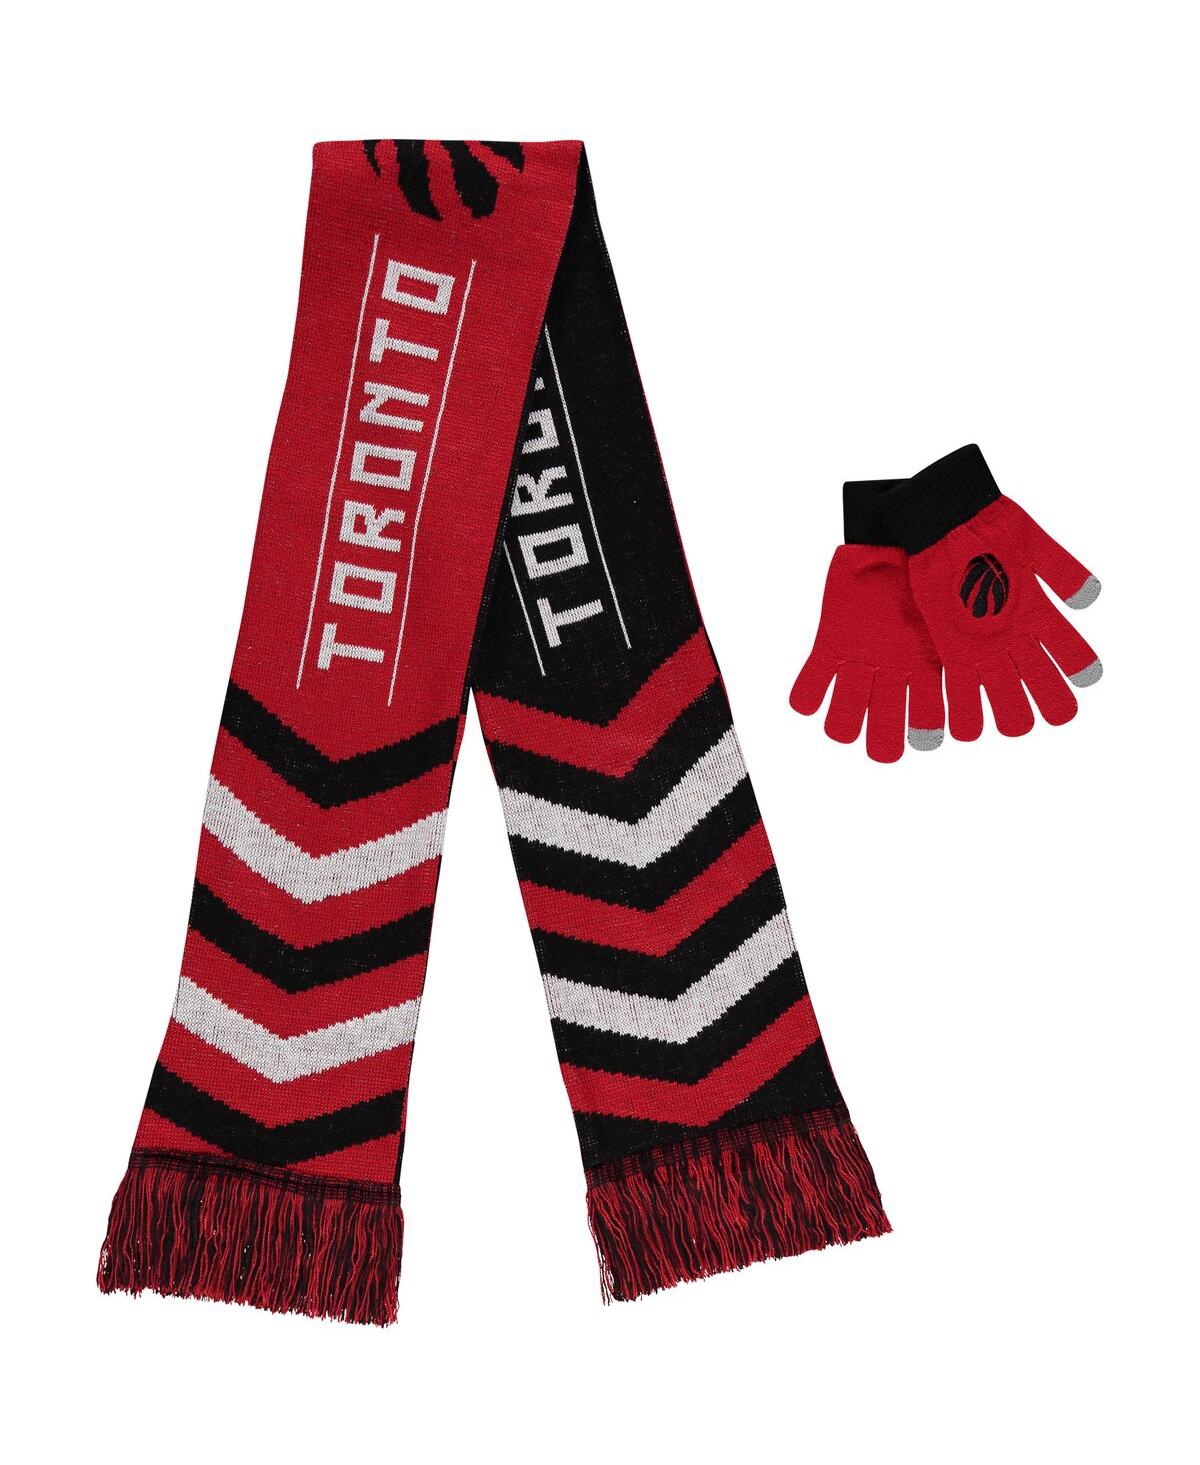 Men's and Women's Foco Red Toronto Raptors Glove and Scarf Combo Set - Red